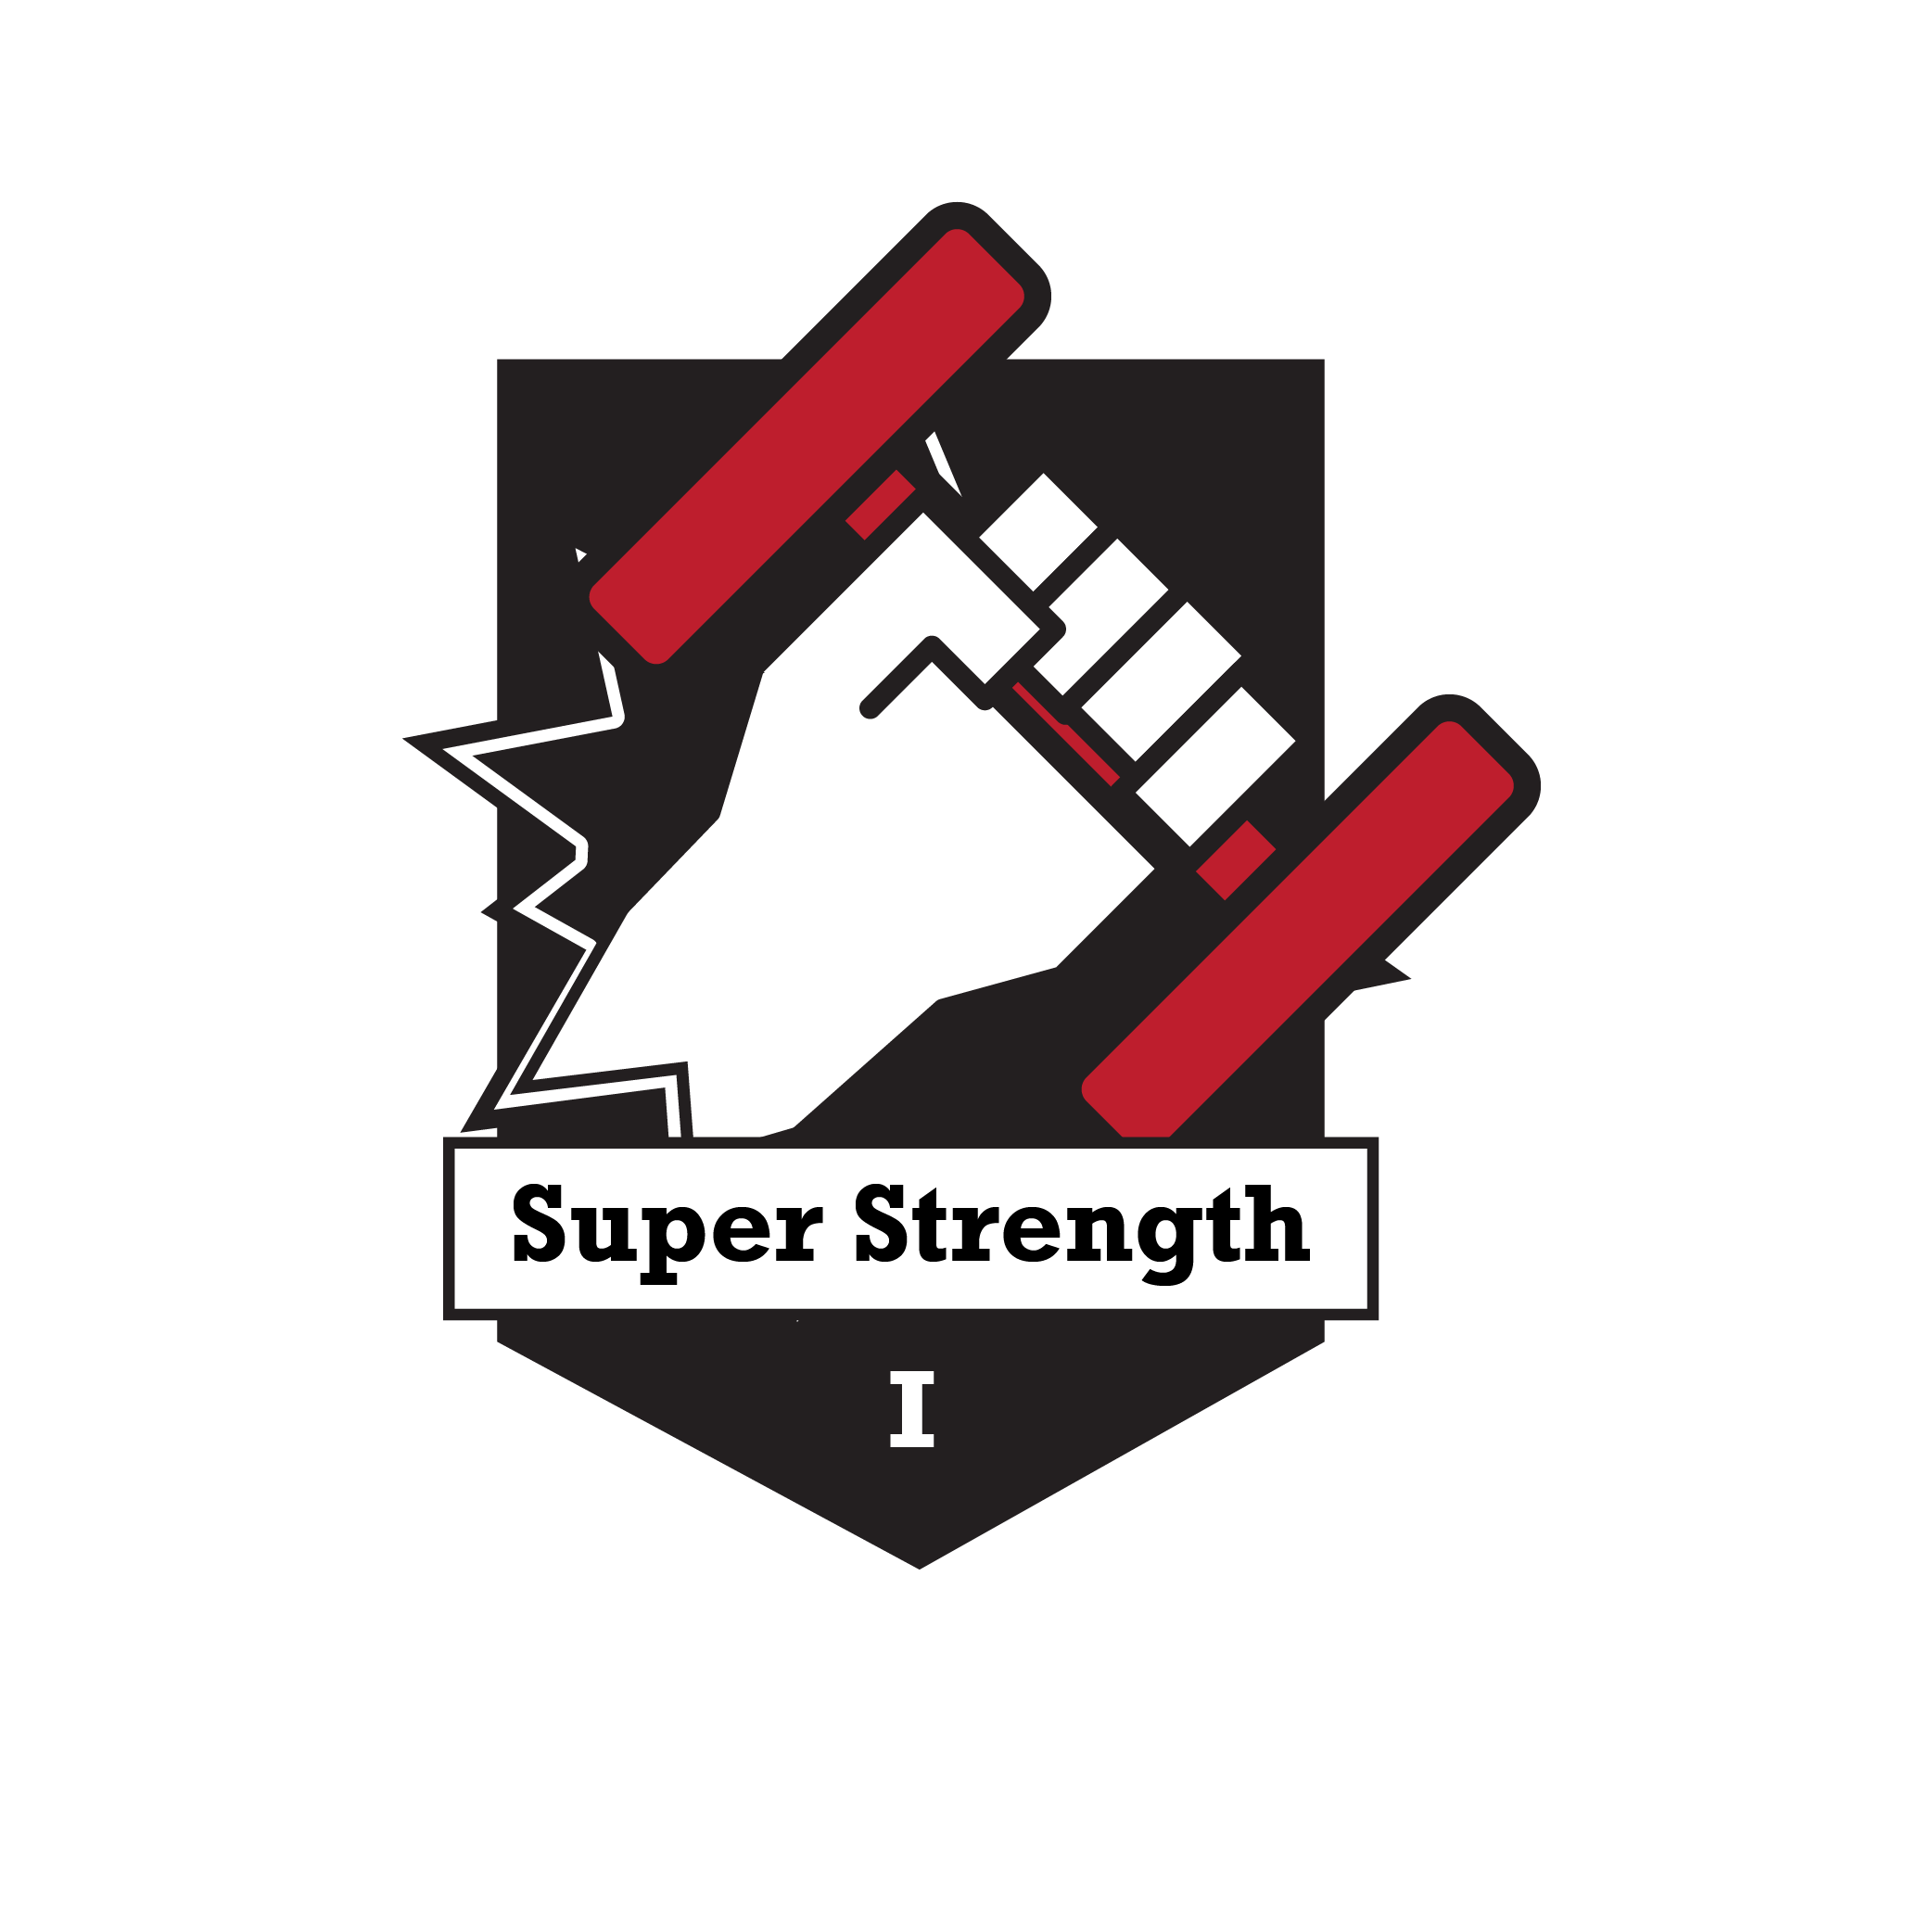 super strength badge includes a hand holding a barbell